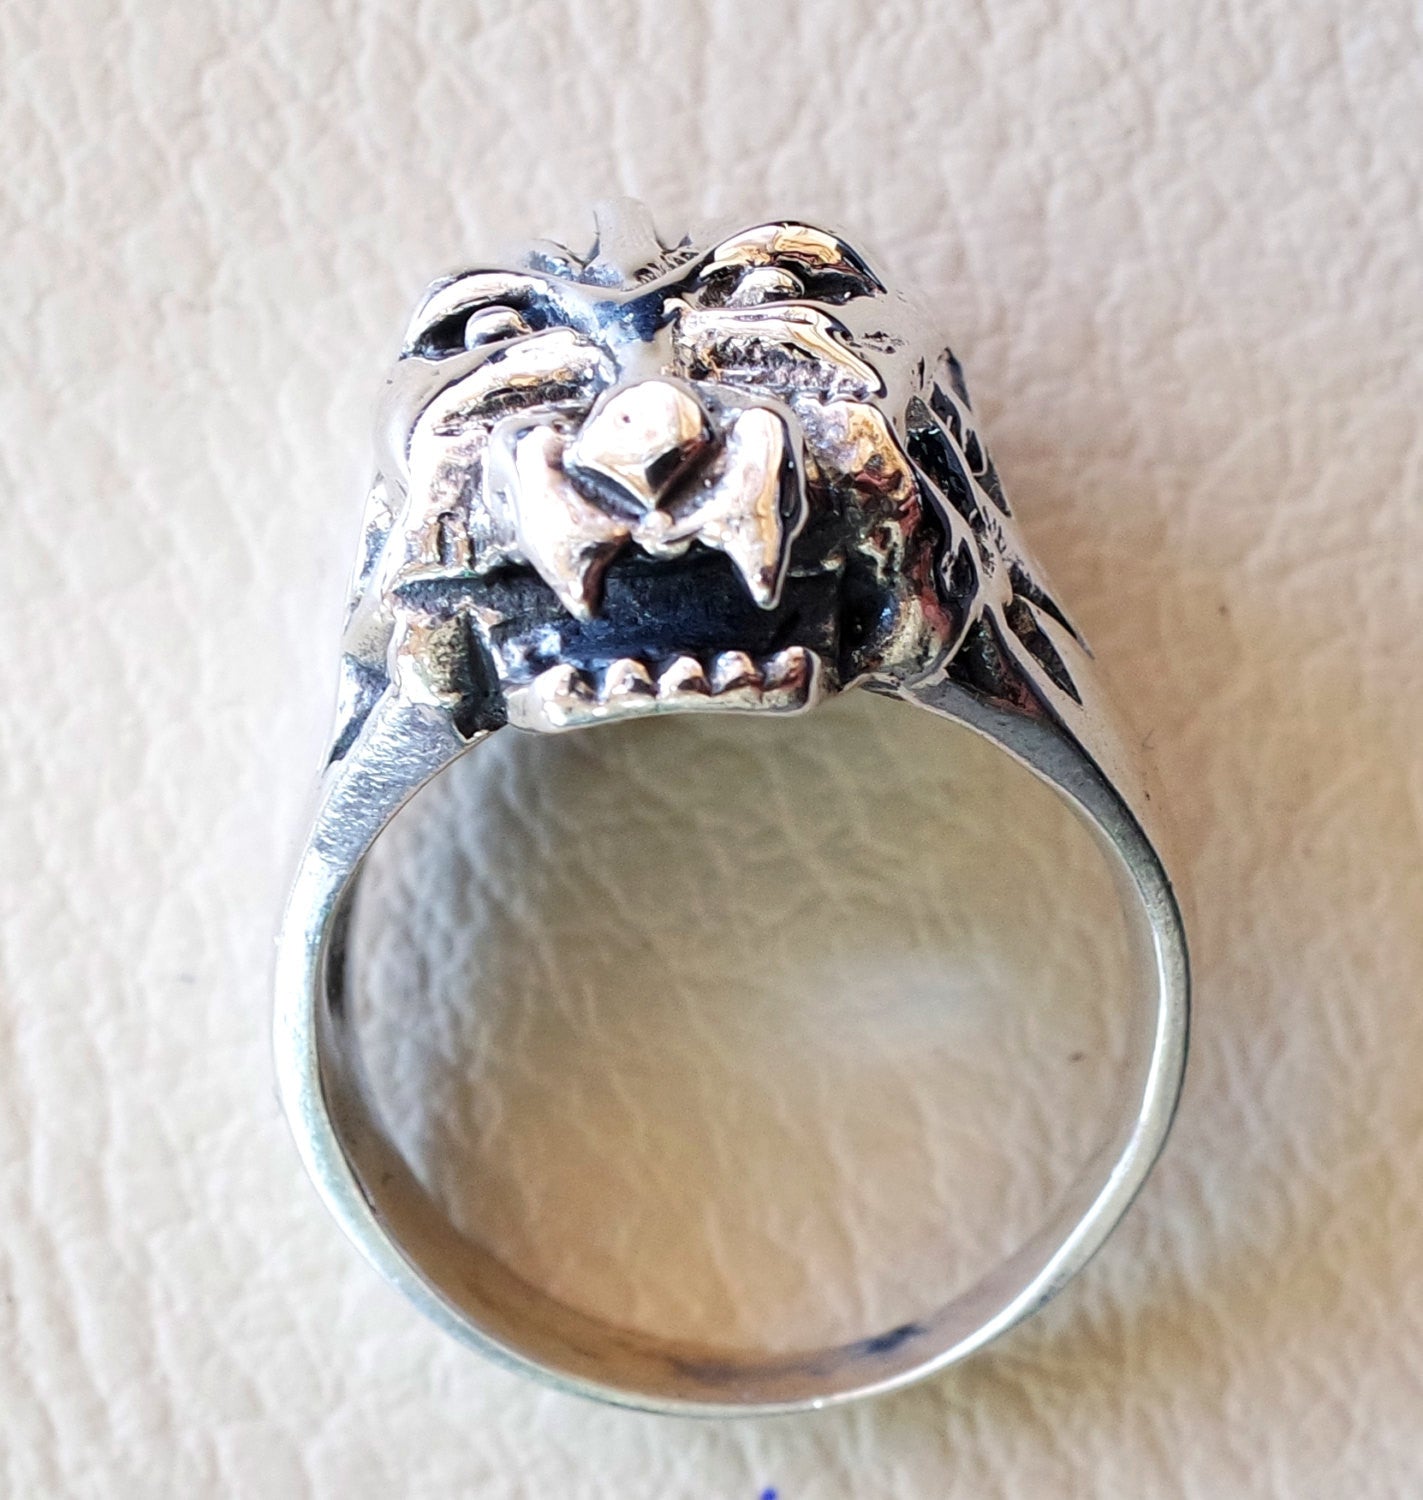 beast head ring  heavy sterling silver 925 man biker ring all sizes handmade animal jewelry fast shipping detailed craftsmanship